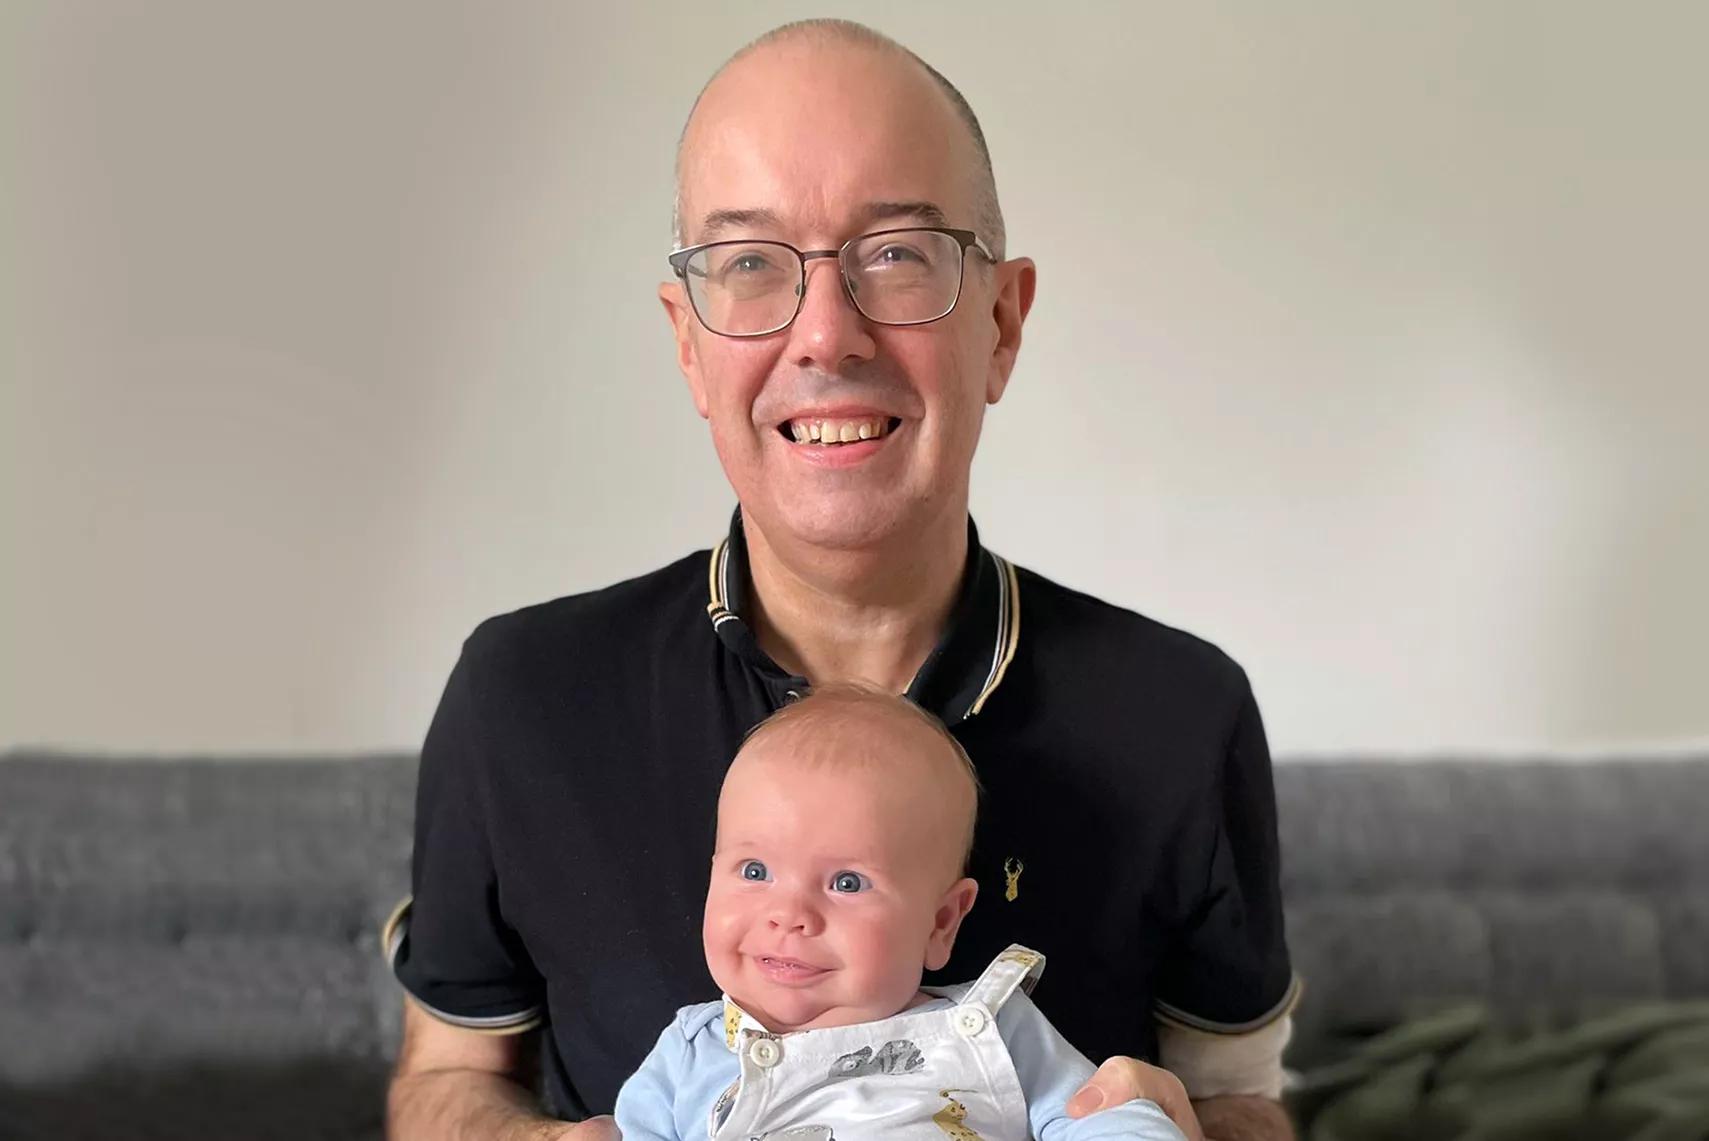 middle aged man with glasses, sitting on the sofa with a baby on his knee, he is smiling